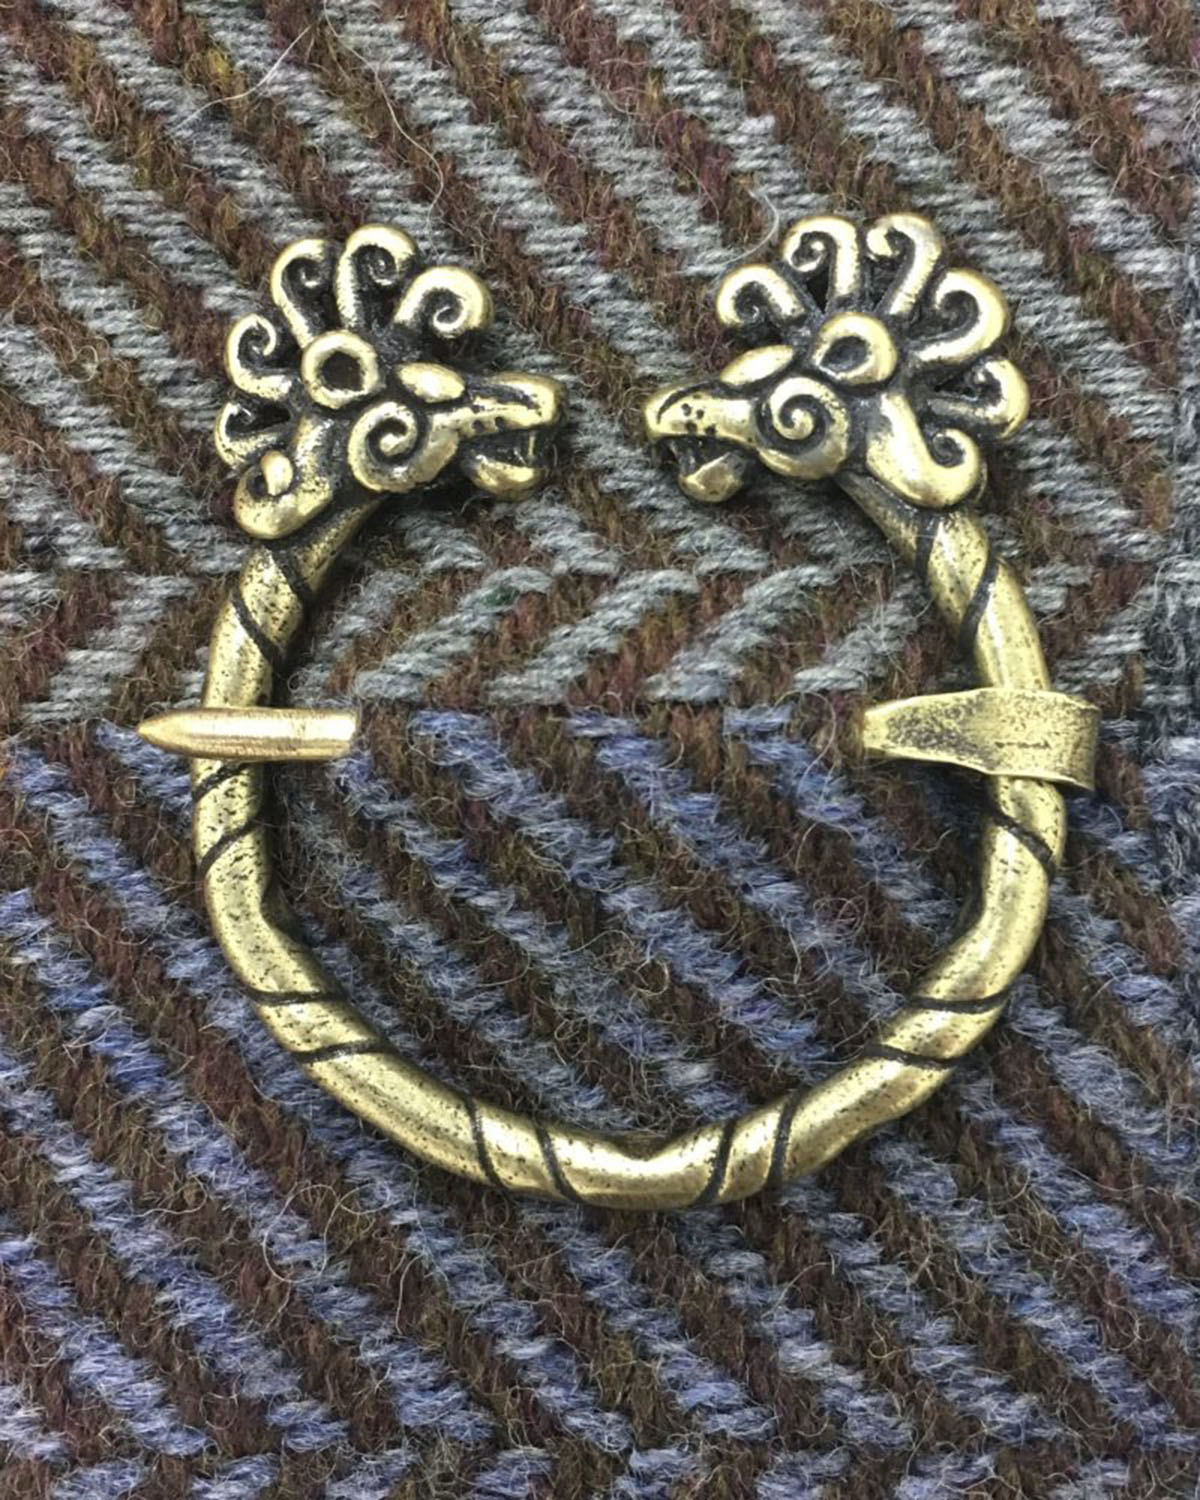 A pair of brass rings with flowers on them.